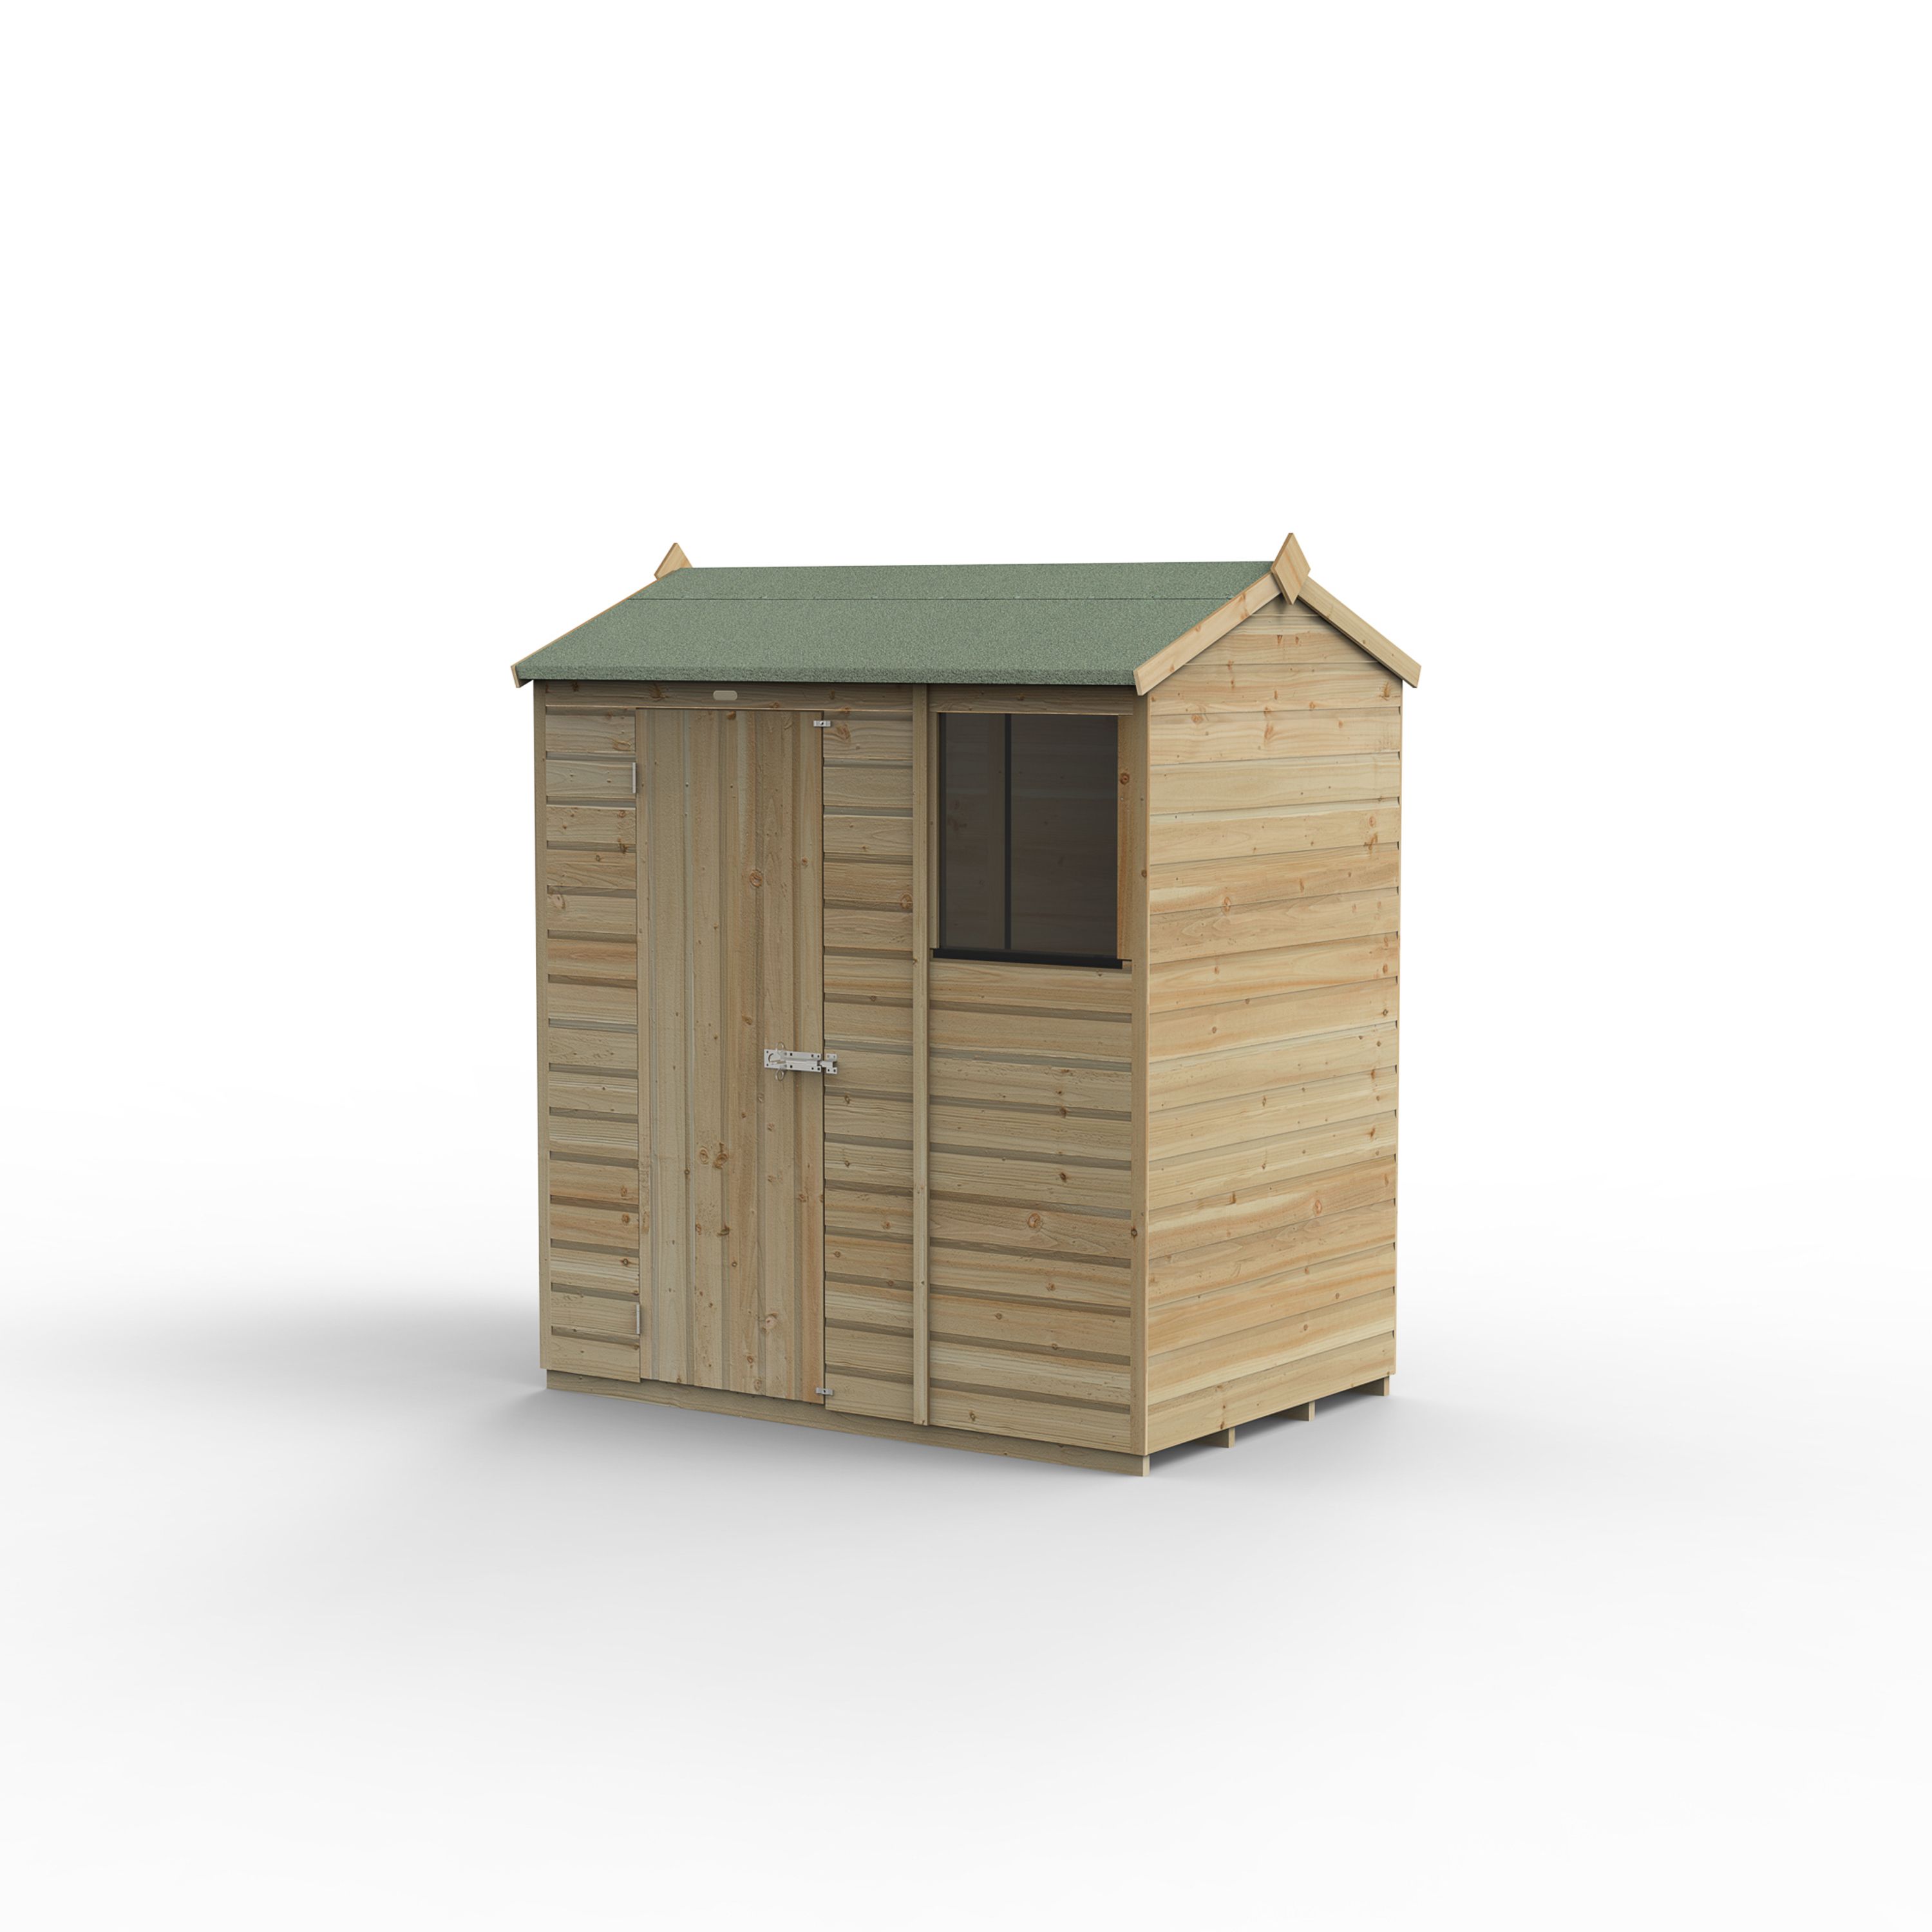 Forest Garden Beckwood 6x4 ft Reverse apex Natural timber Wooden Shed with floor & 1 window